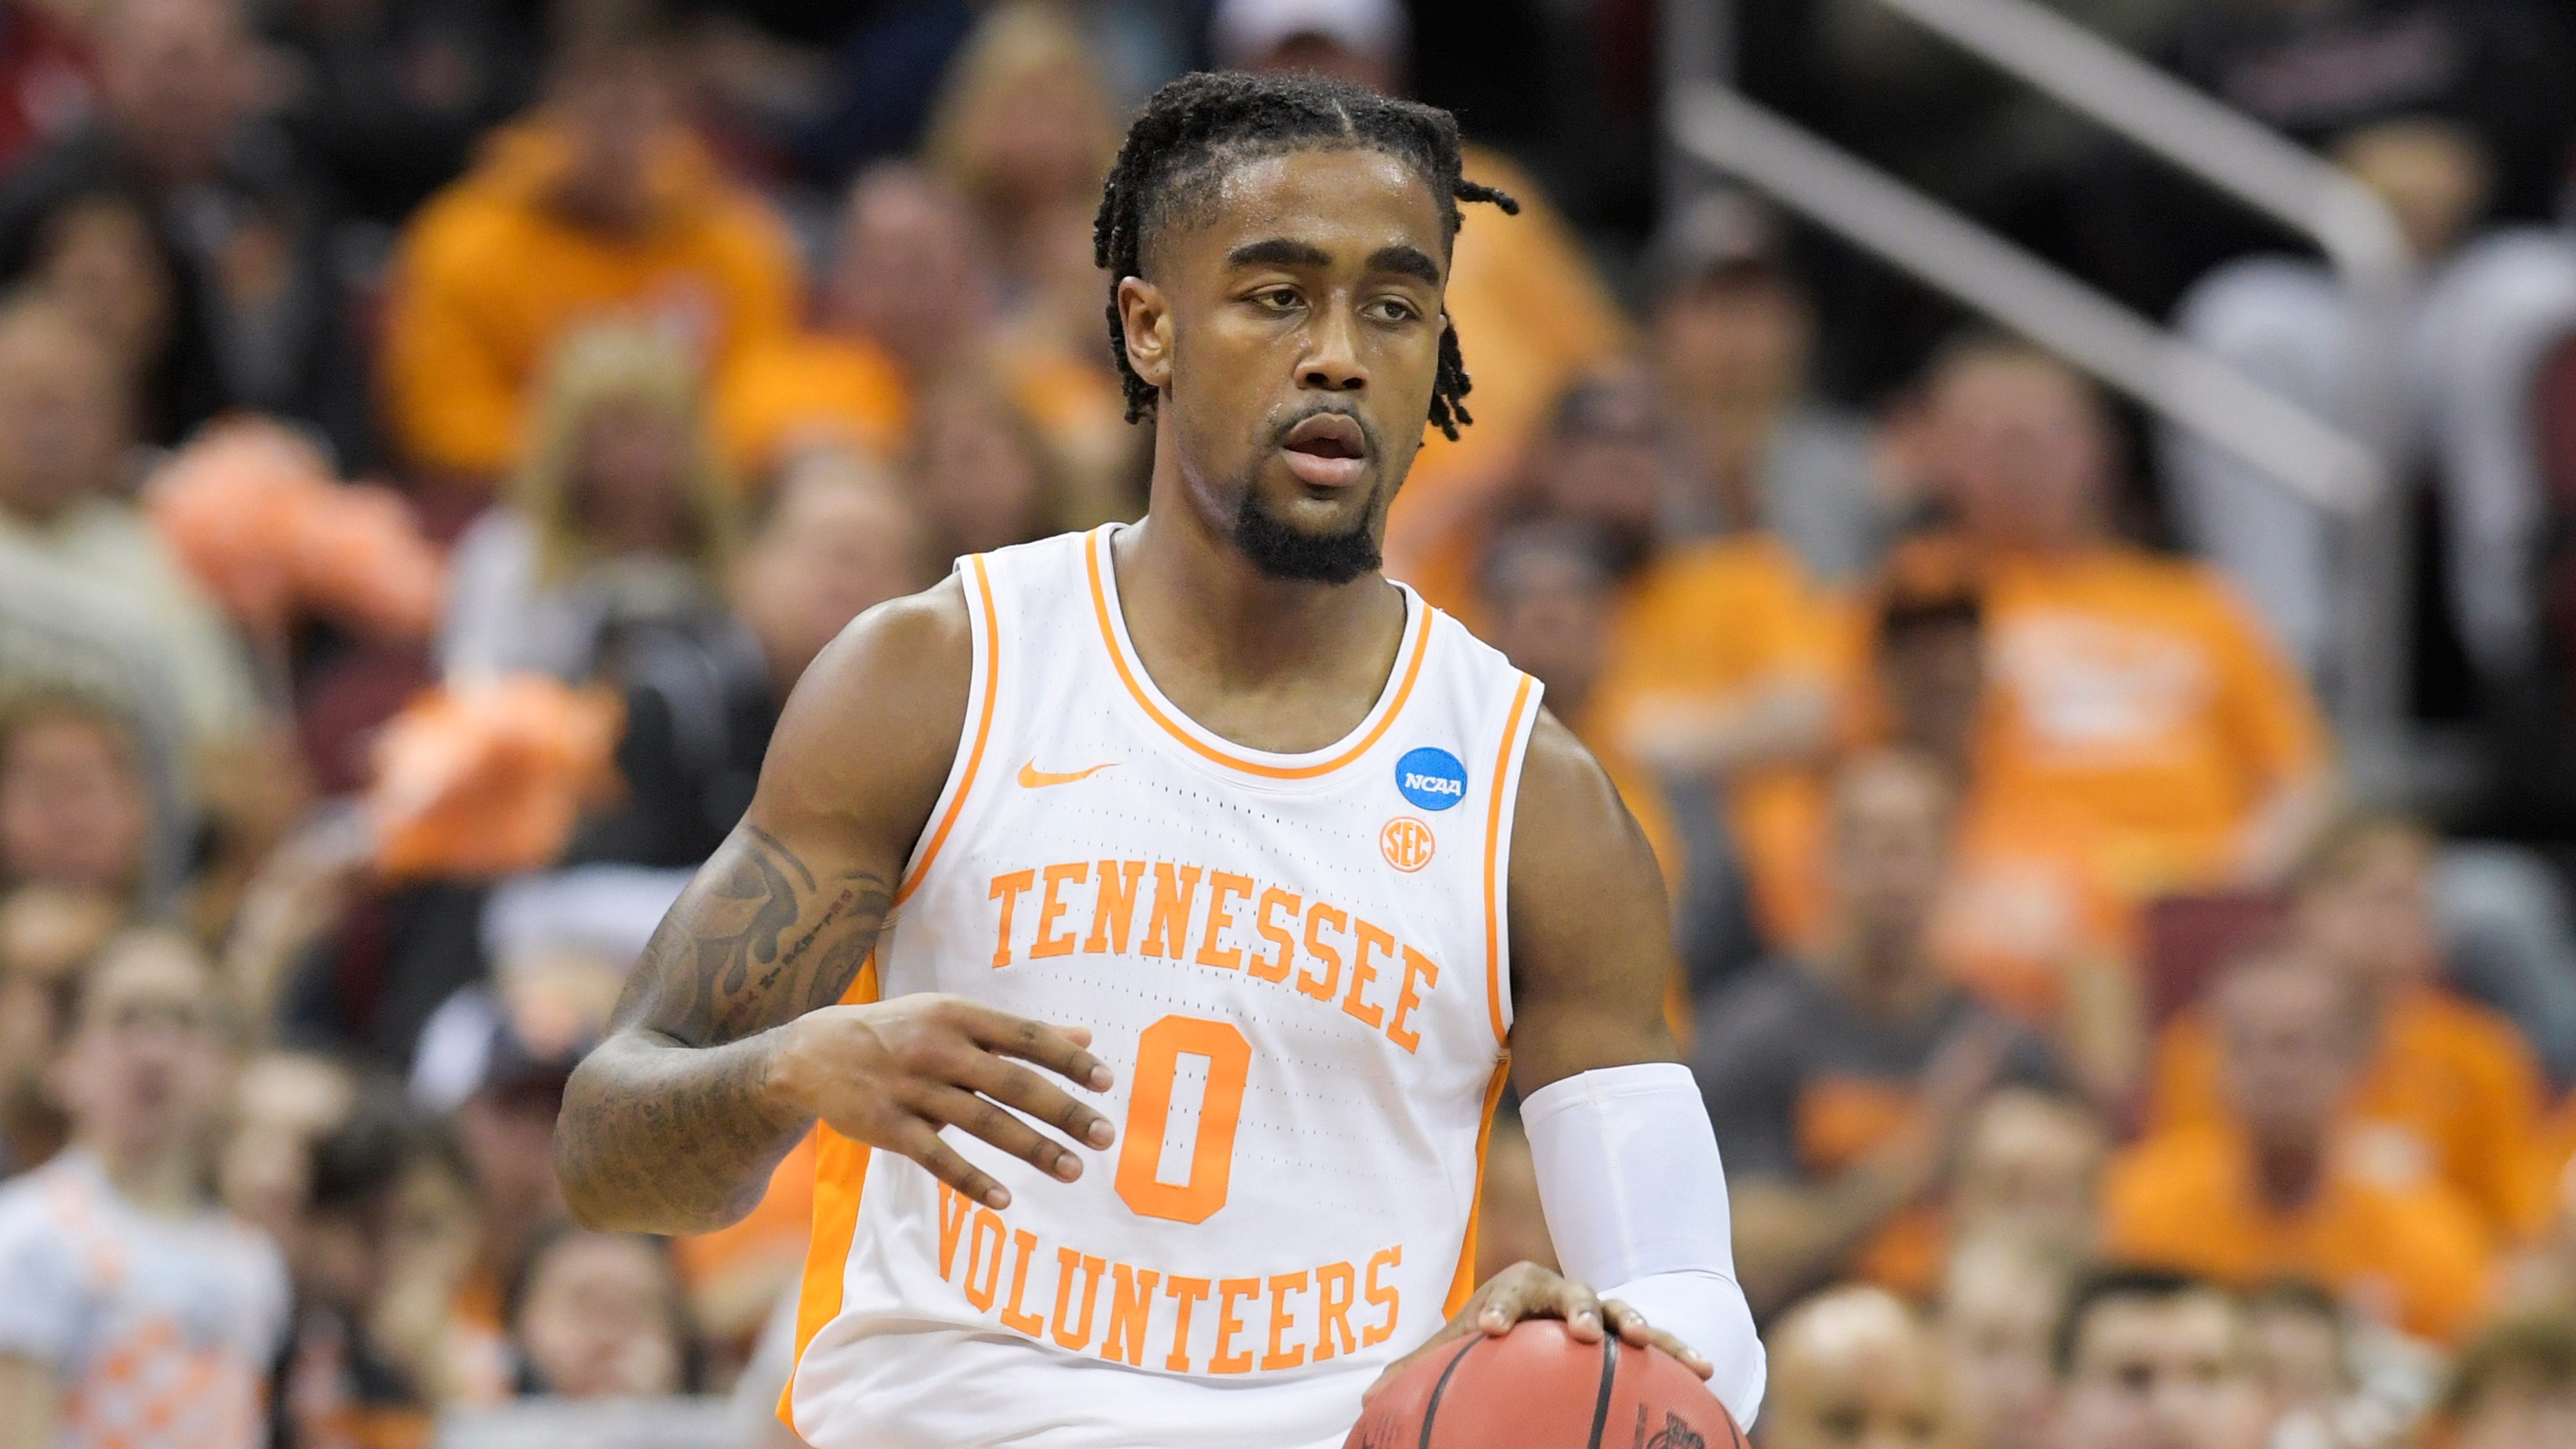 The Pistons traded for the rights to 6-foot-3 guard Jordan Bone of Tennessee, who was taken by the Pelicans with the No. 57 pick.